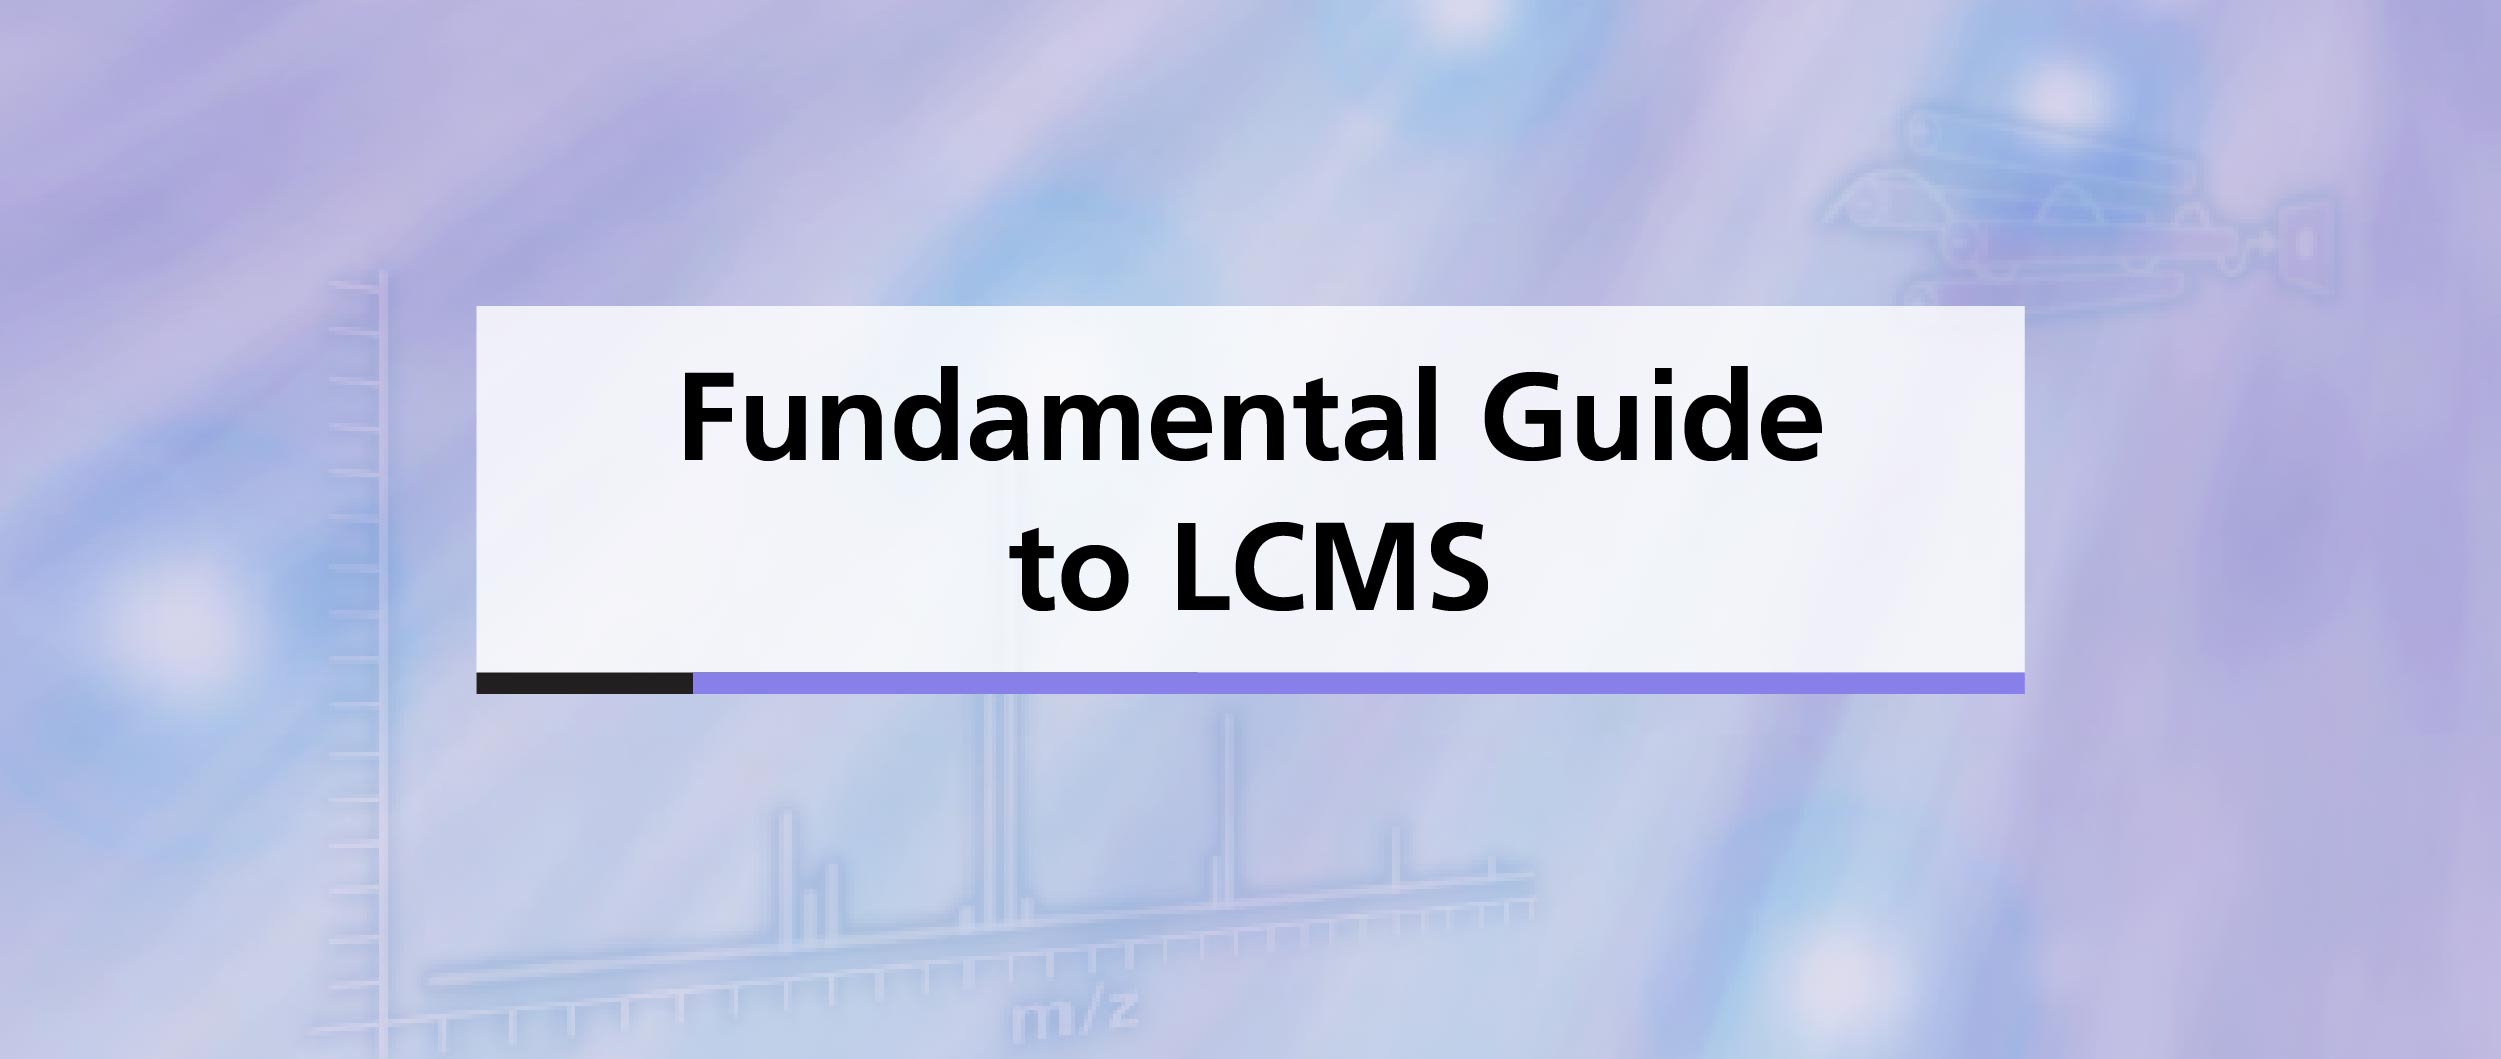 Fundamental Guide to LCMS